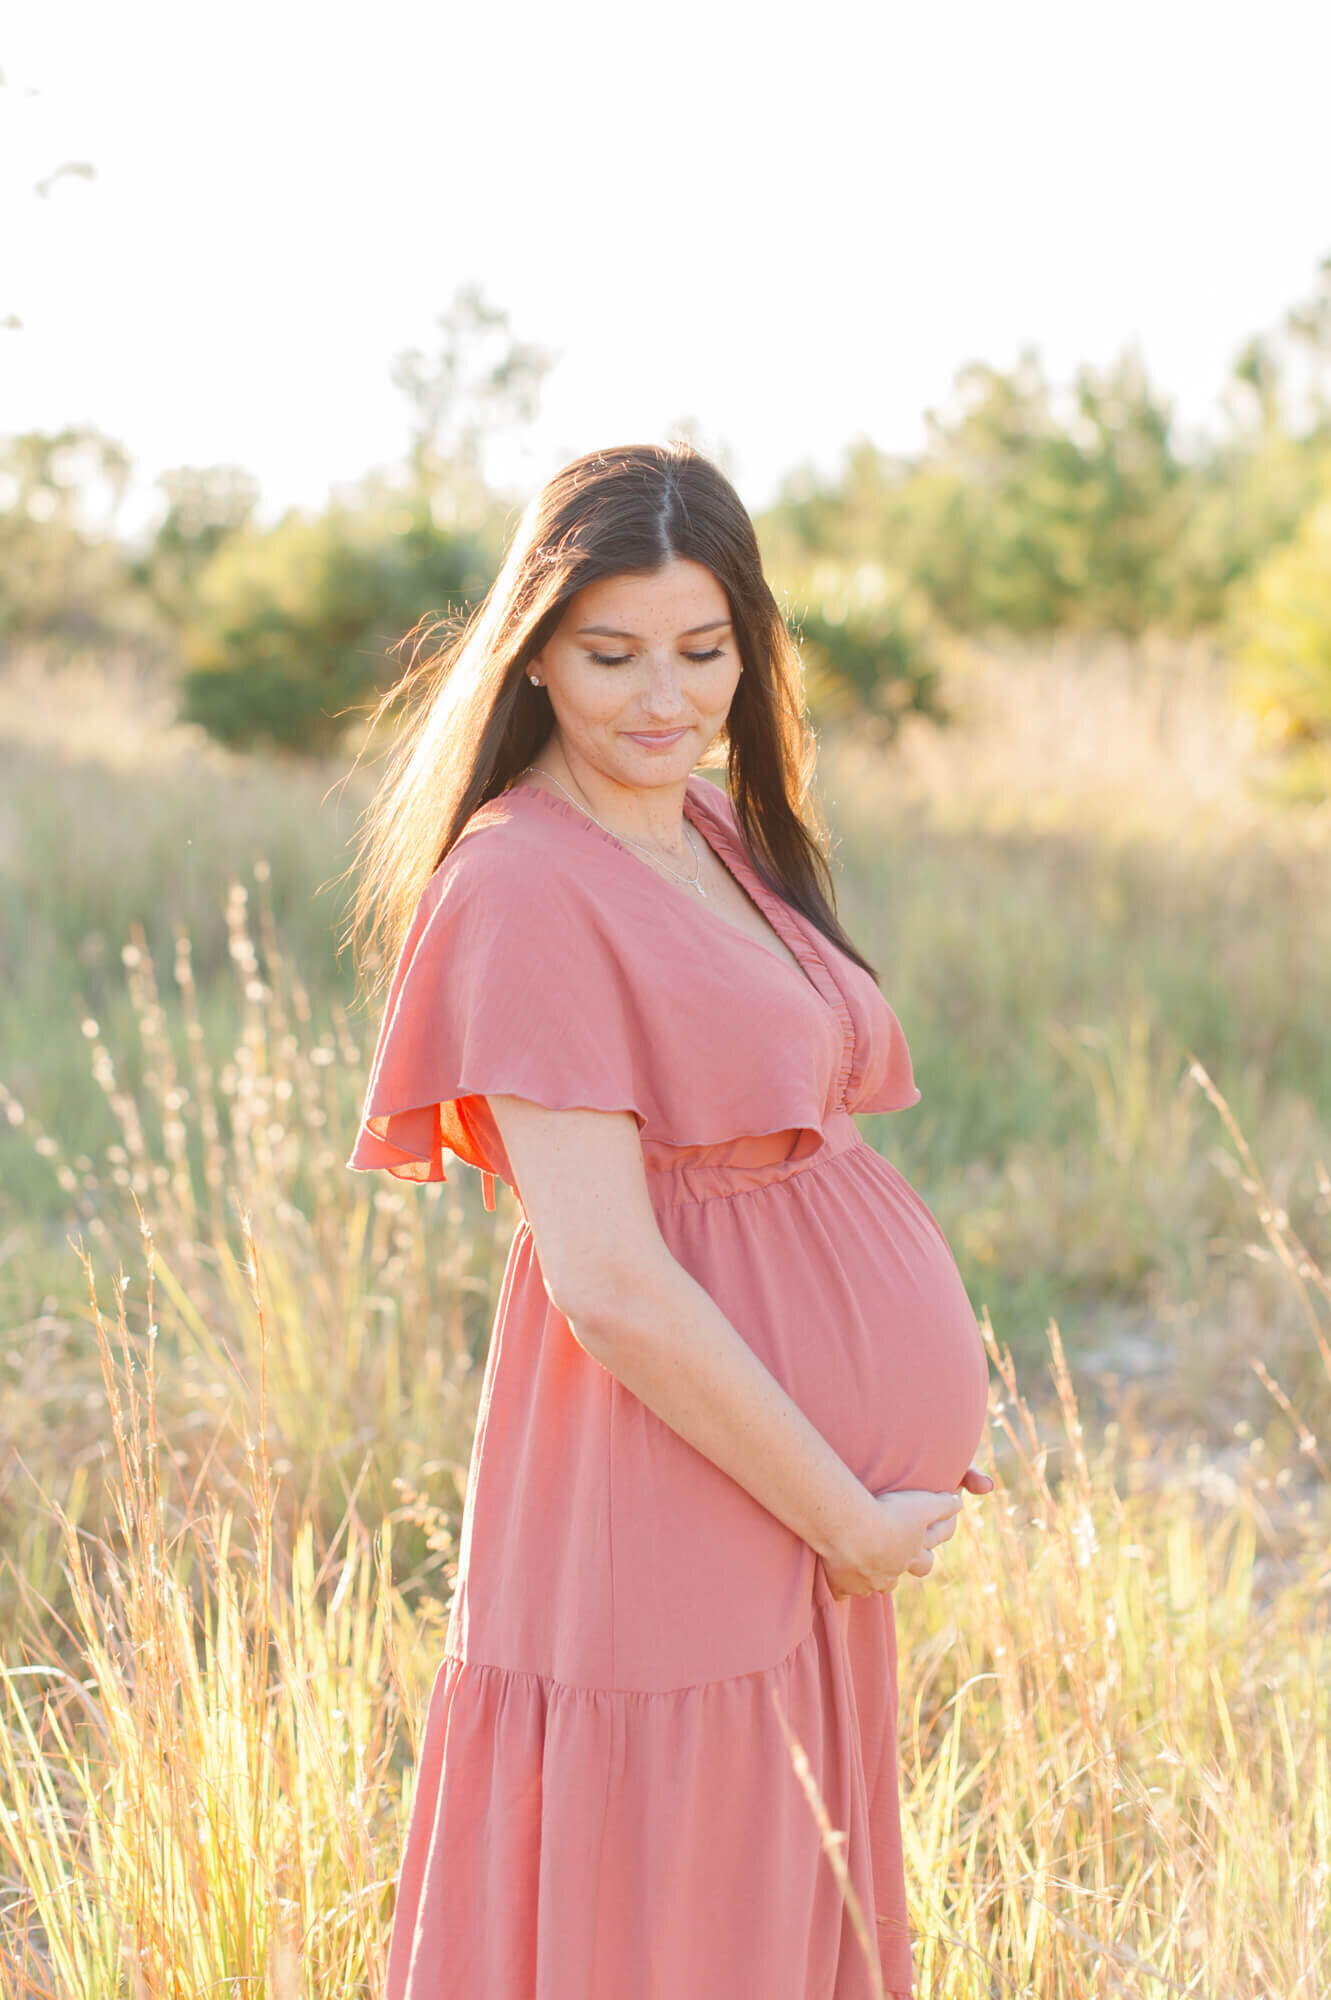 New mom holding her belly in a tall grass field at sunset wearing a pink dress